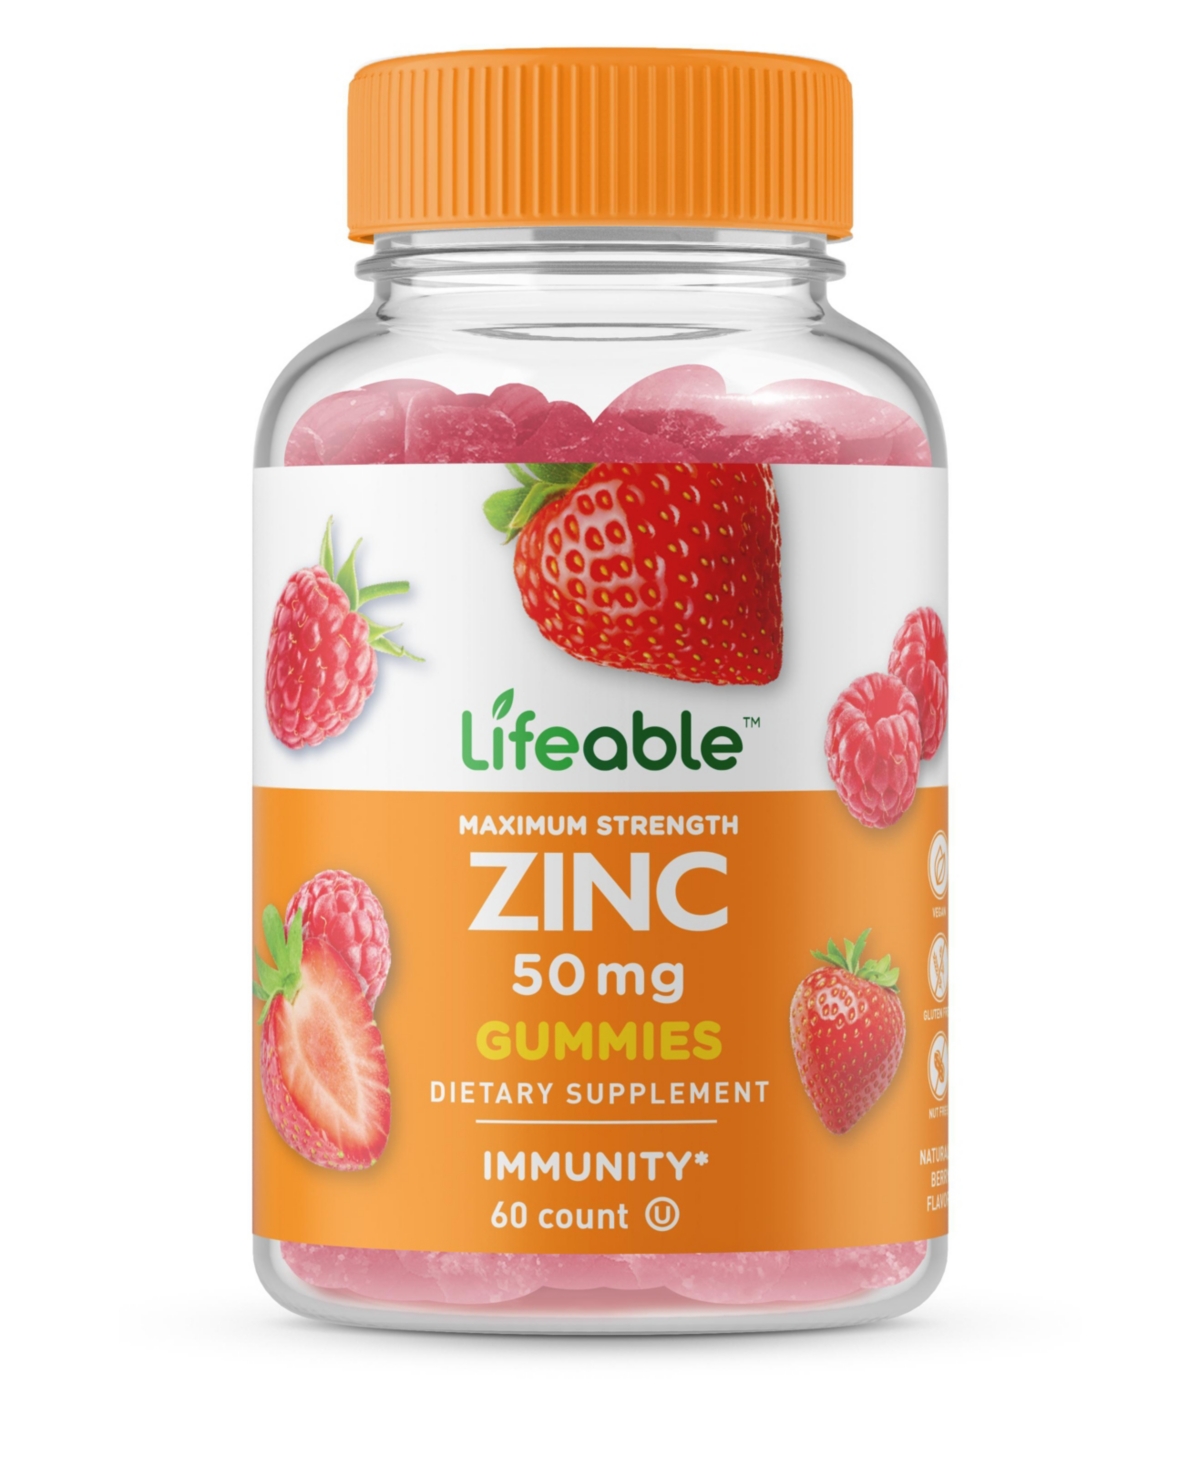 Zinc 50 mg Gummies - Healthy Skin And Immunity - Great Tasting Natural Flavor, Dietary Supplement Vitamins - 60 Gummies - Open Miscellaneous